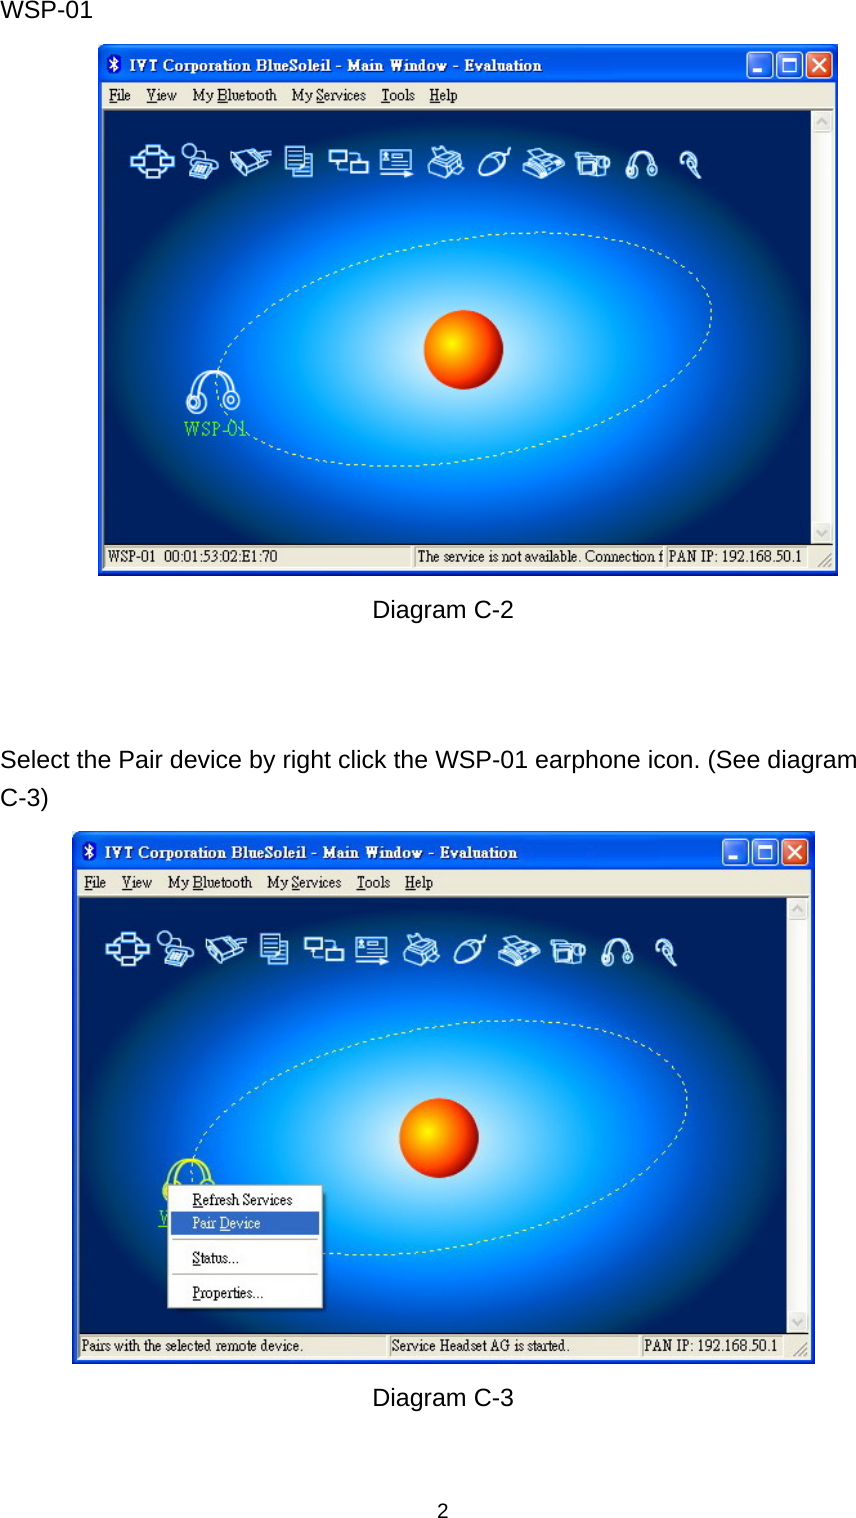  2WSP-01  Diagram C-2    Select the Pair device by right click the WSP-01 earphone icon. (See diagram C-3)  Diagram C-3   